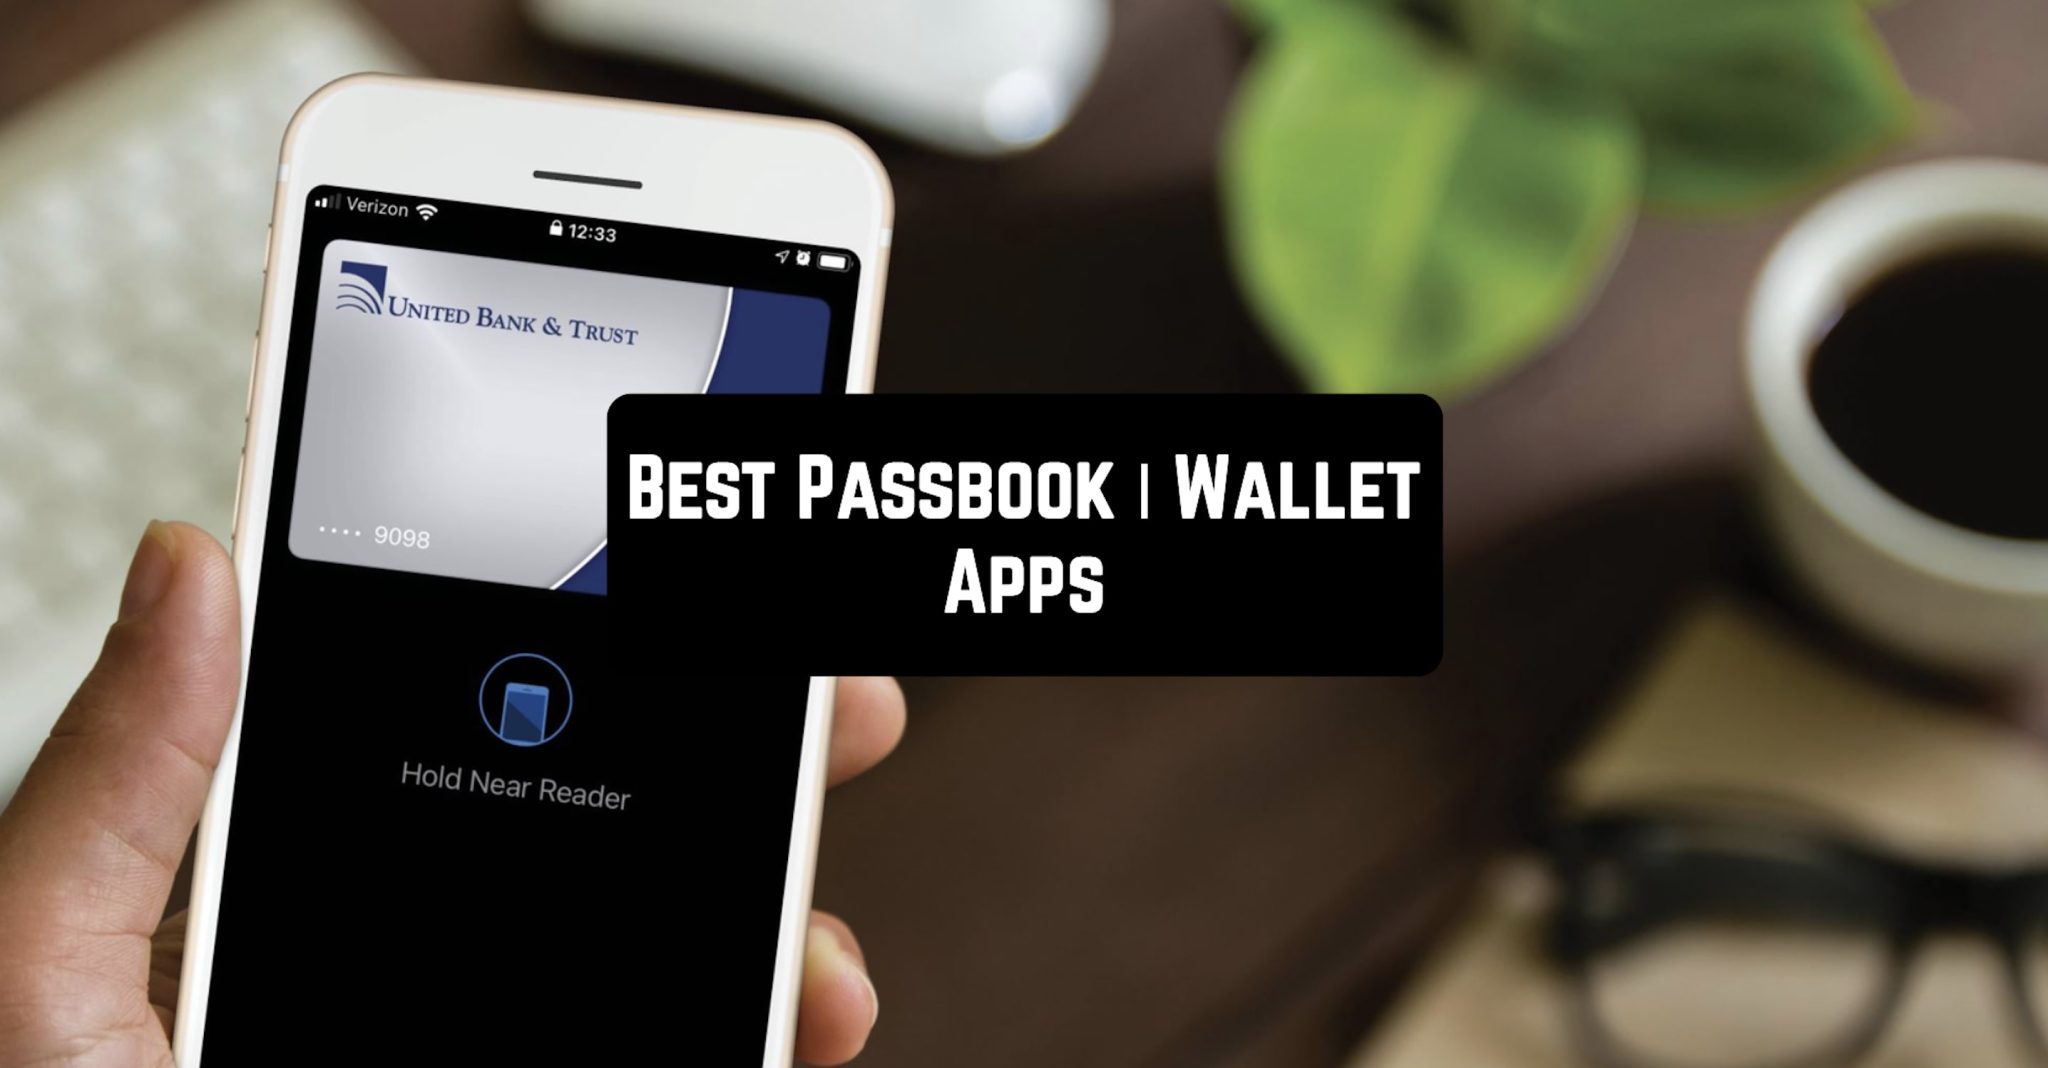 15 Best Passbook Wallet Apps for Android & iOS